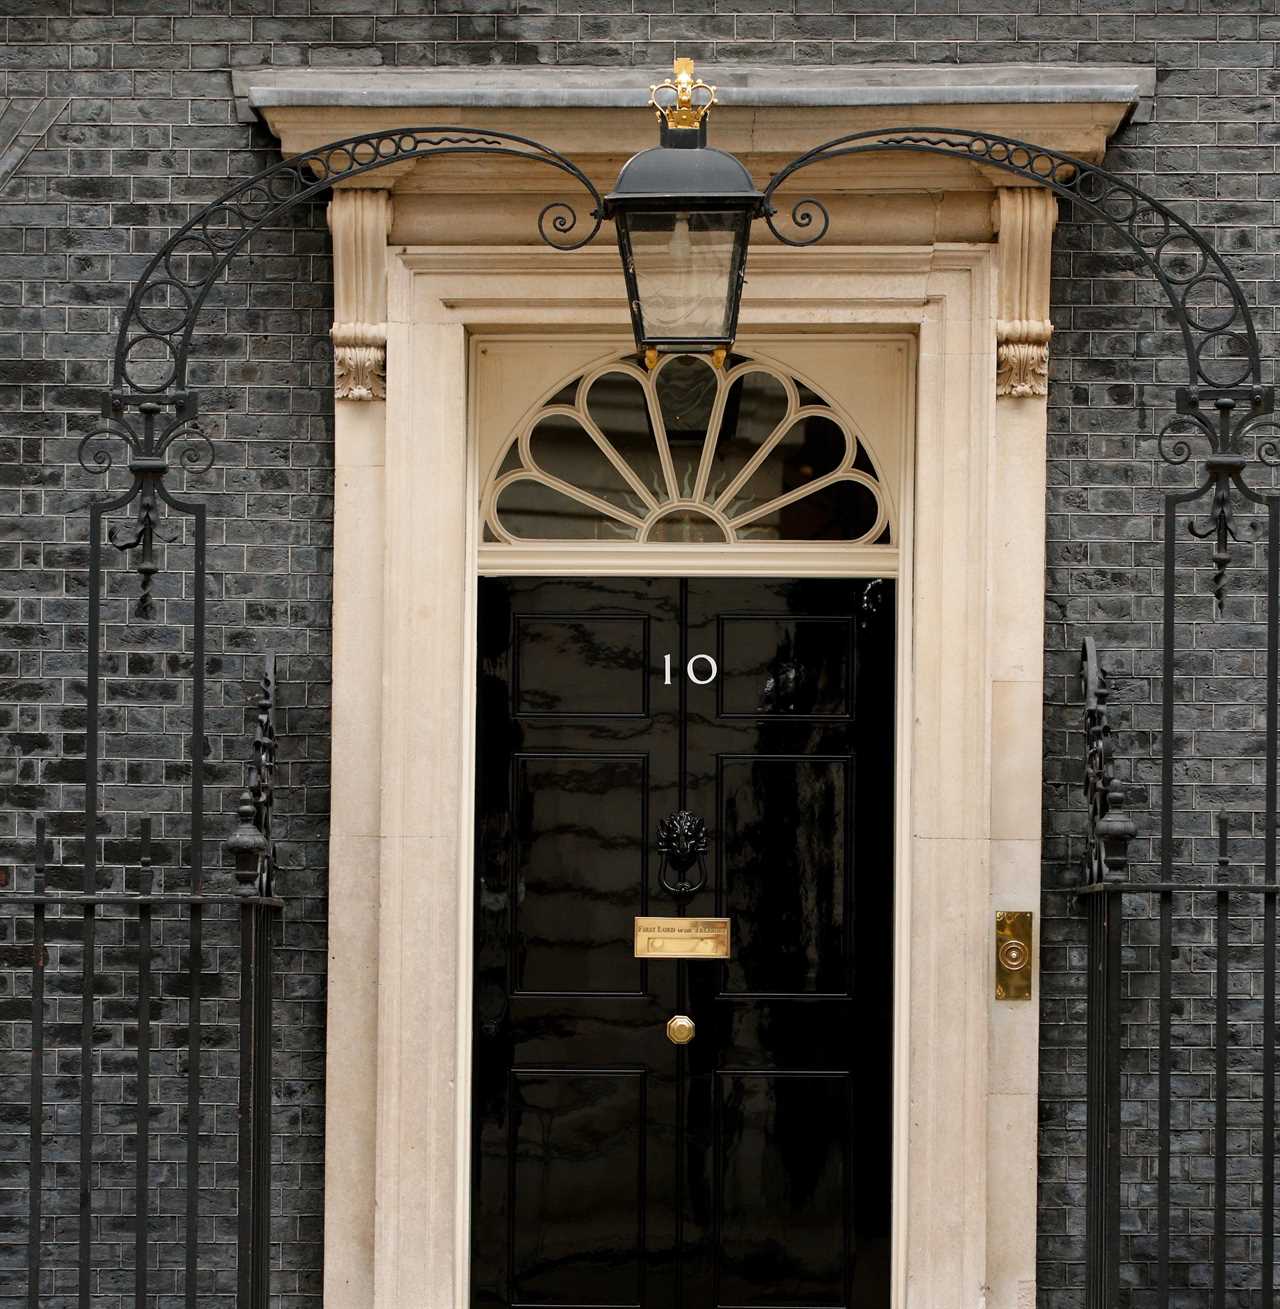 Boris Johnson ‘must scrap Covid passports and ditch booze culture at No10 to save his career’